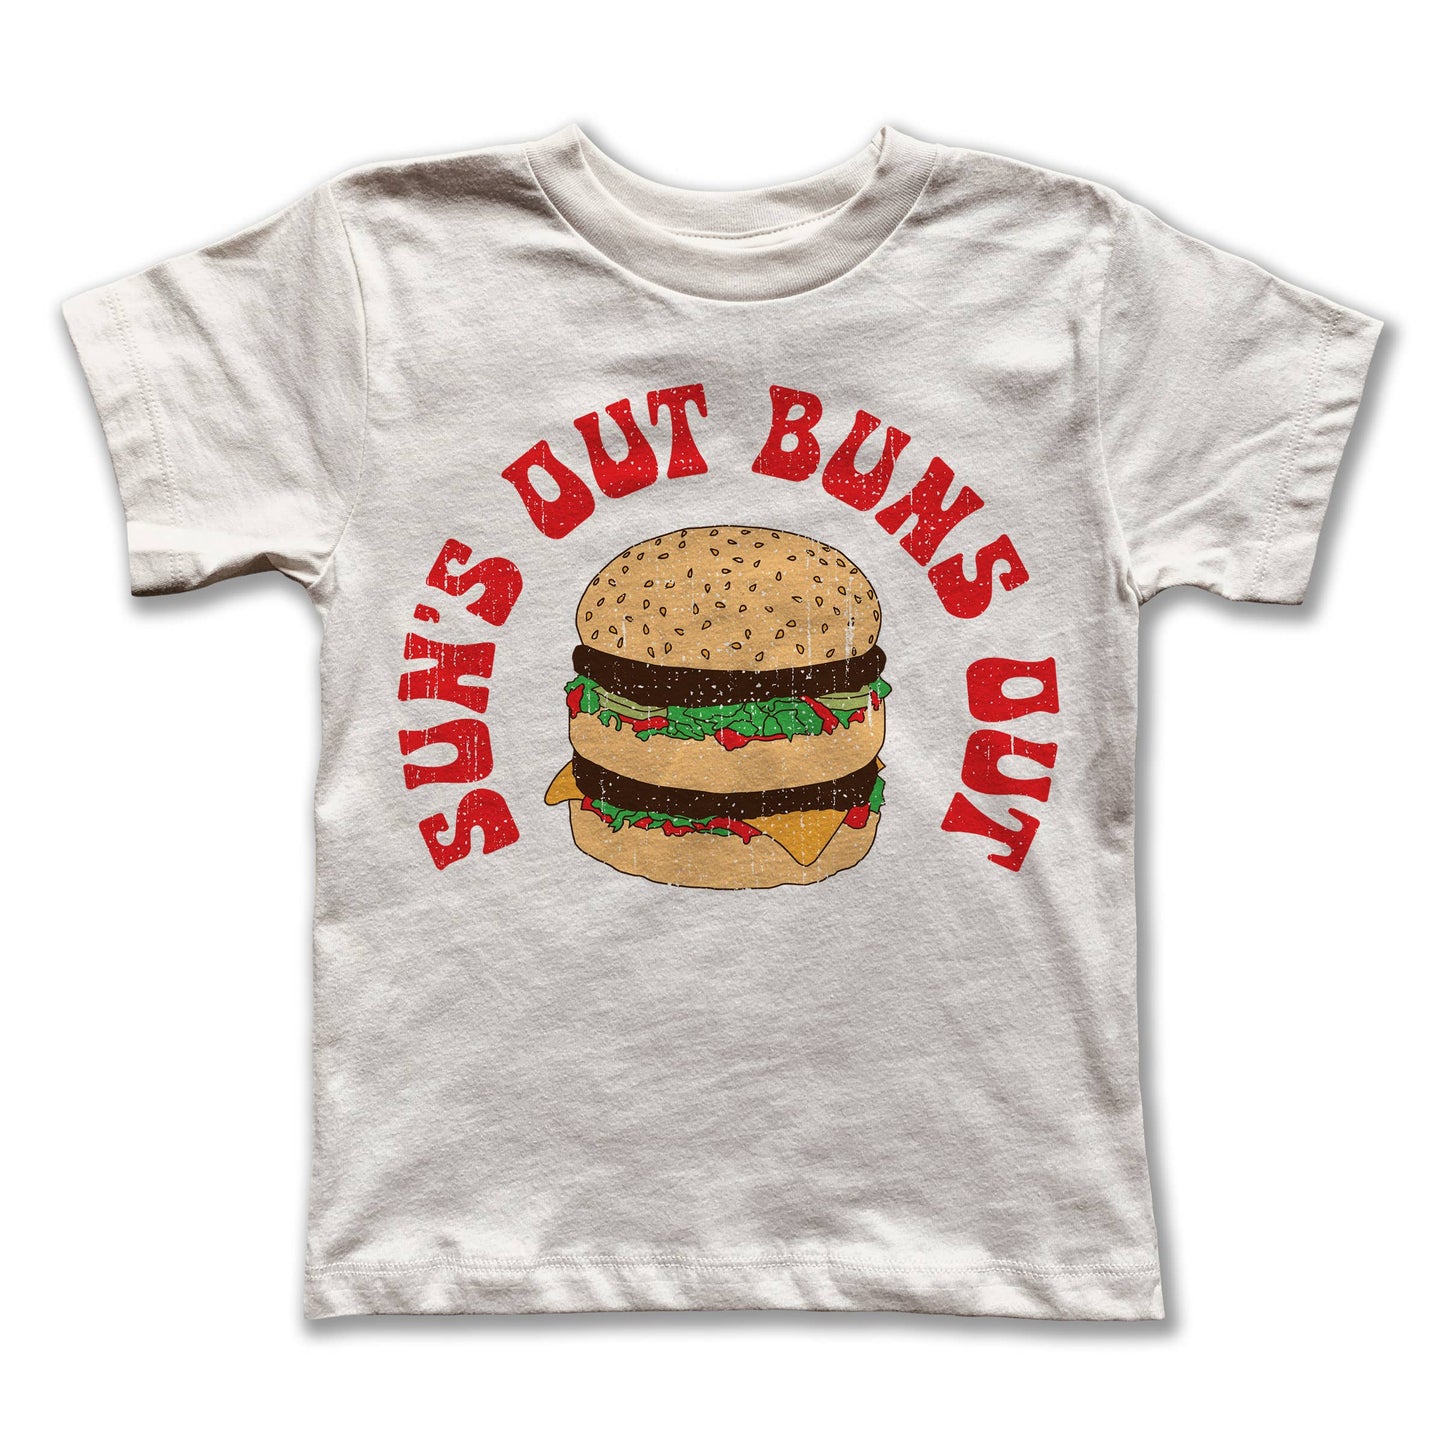 Rivet Apparel Co. - Graphic Tee - Sun's Out Buns Out Tee